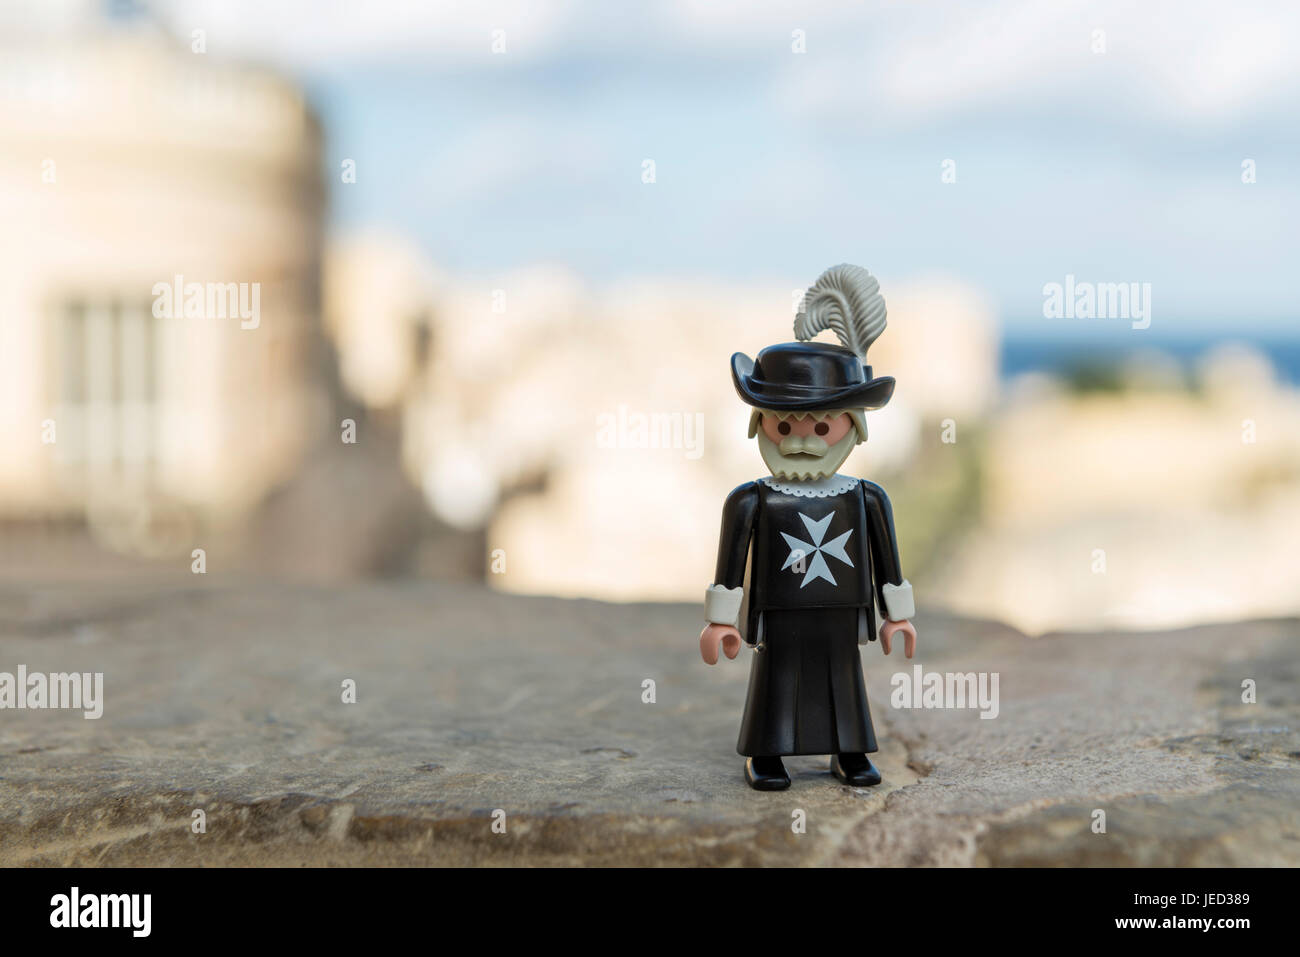 Valletta, Malta - October 11, 2016: Playmobil maltese knight with the Grand Harbour in the background. Playmobil are famous construction toys manufact Stock Photo